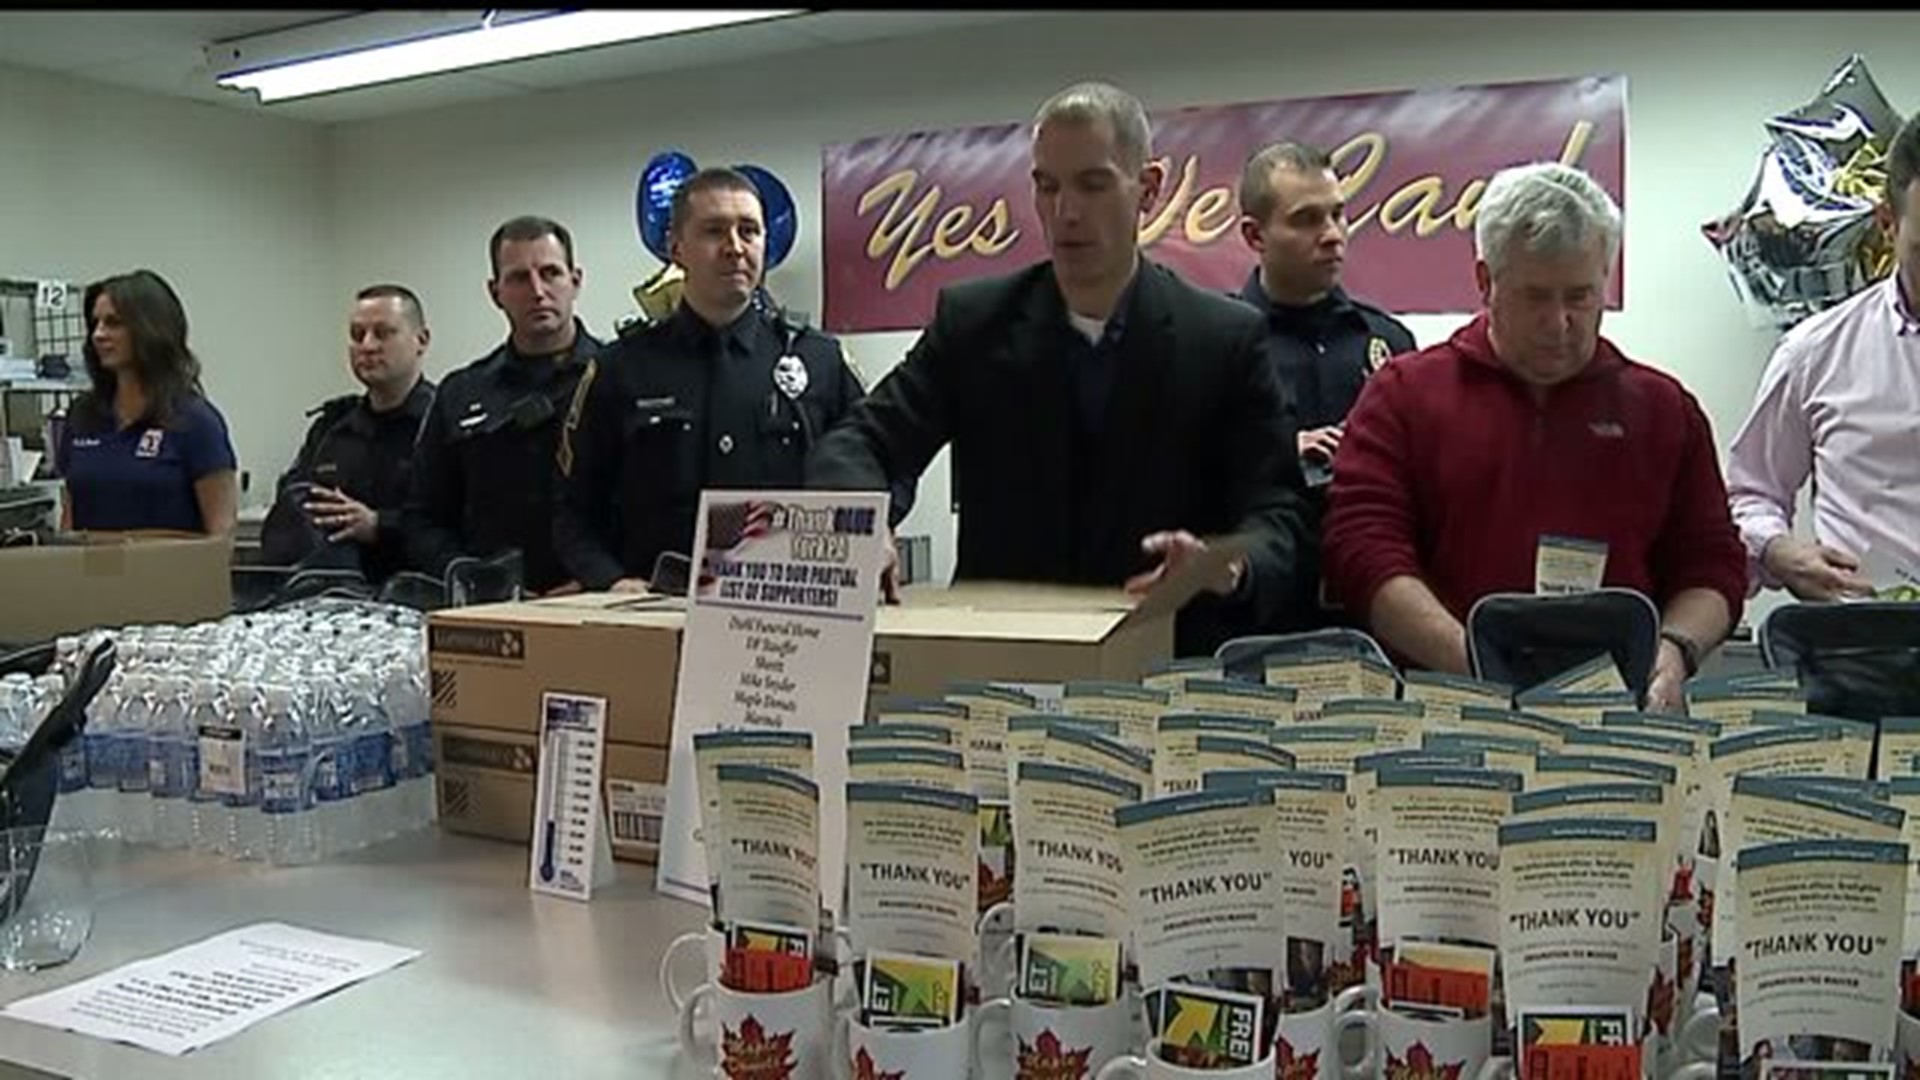 The public shows York County police officers appreciation